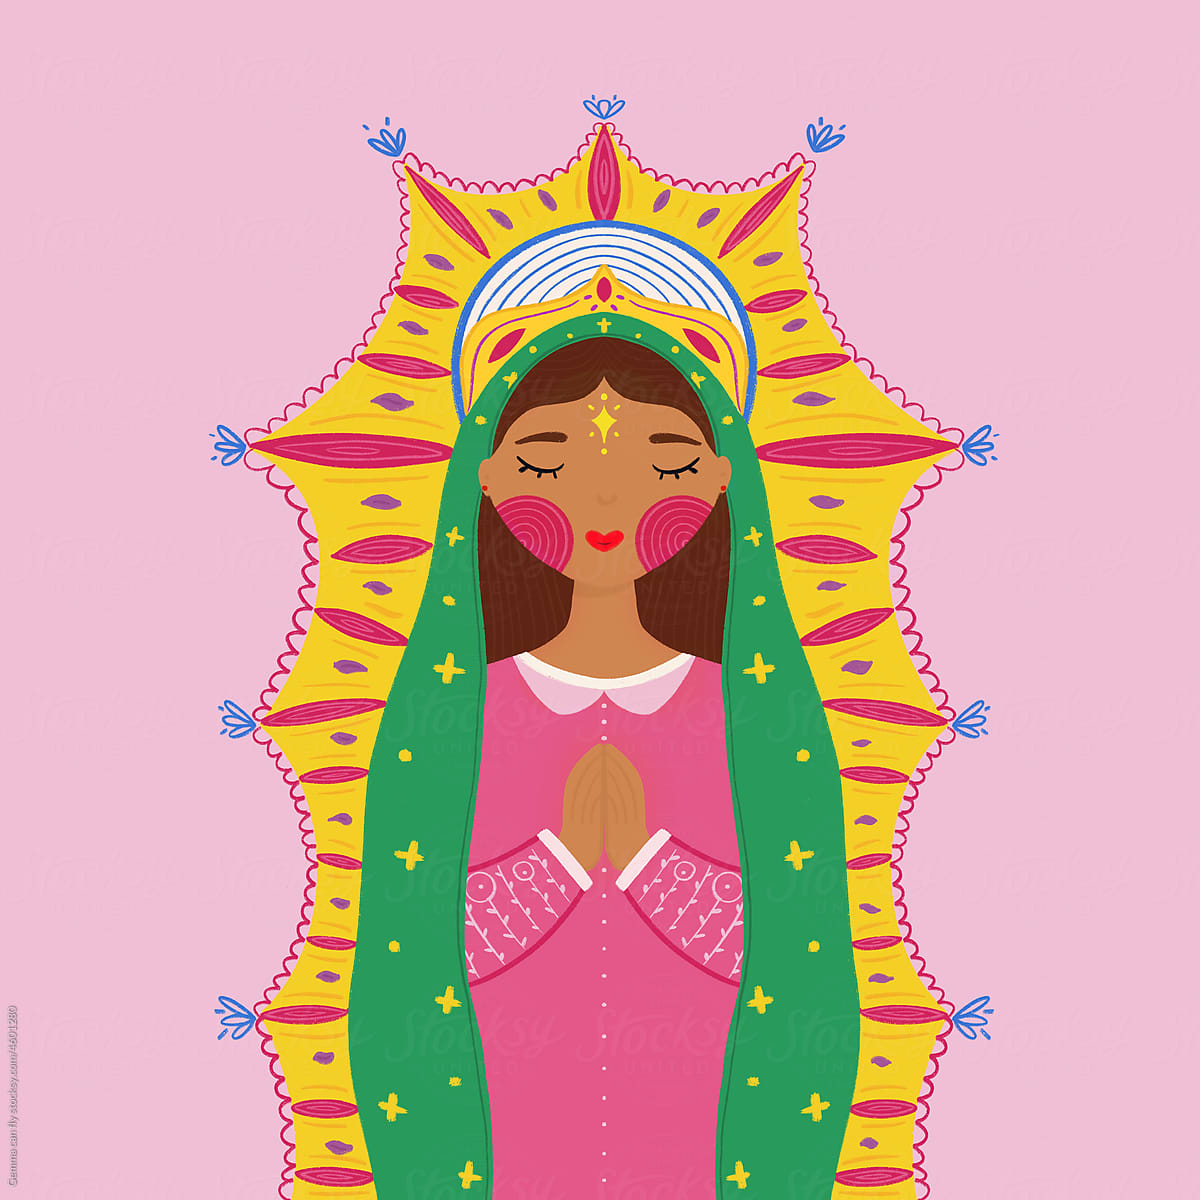 Virgin of Guadalupe, colorful minimal Mexico religious illustration